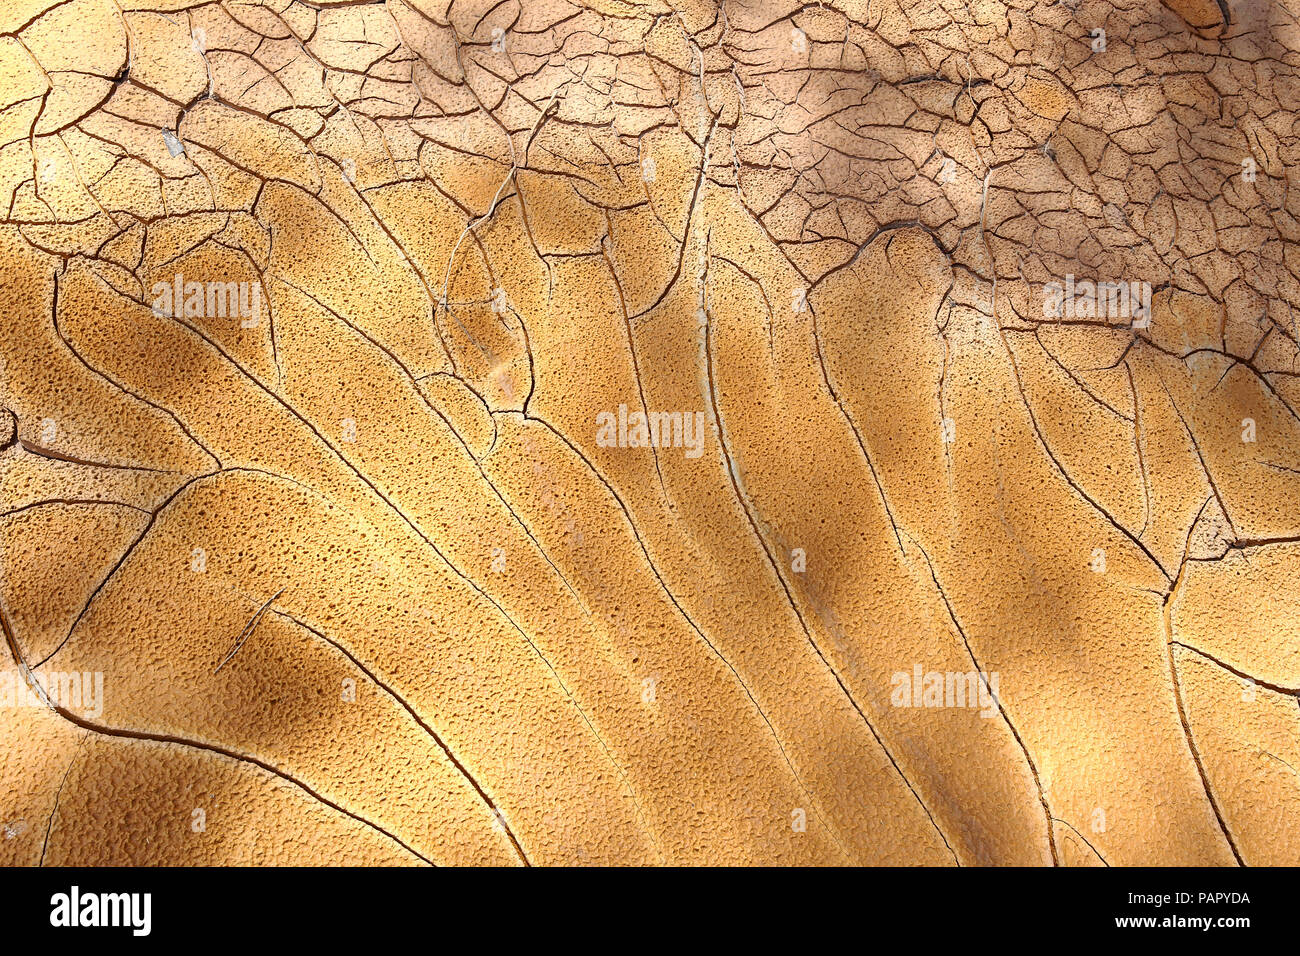 Spain, Andalusia, Rio Tinto, riverside, dried out sand Stock Photo